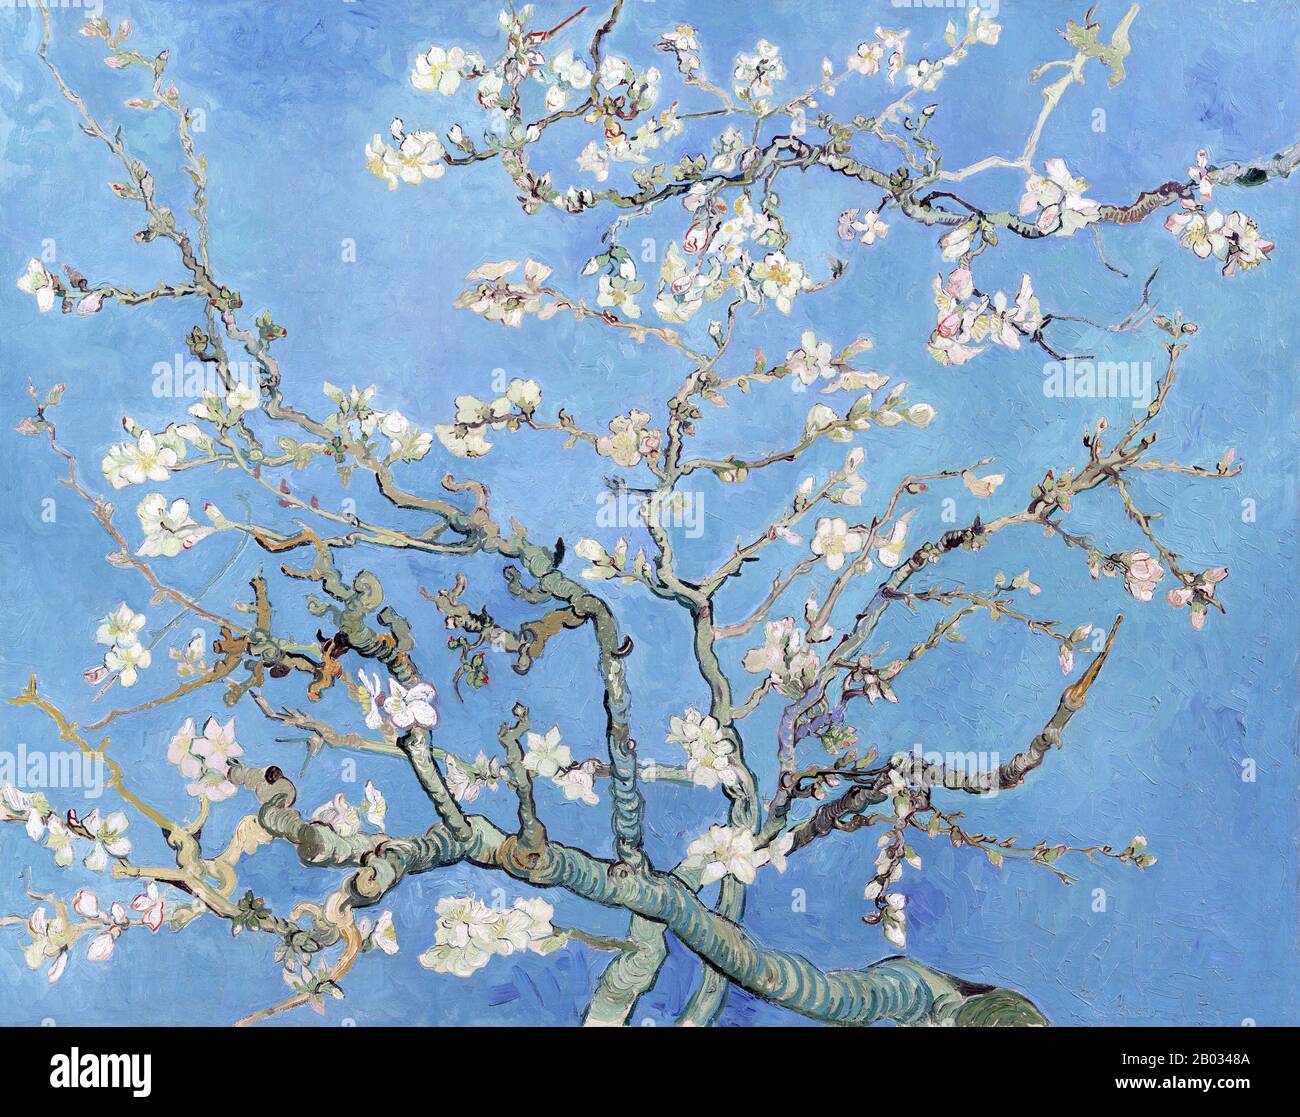 Almond Blossoms is from a group of several paintings made in 1888 and 1890 by Vincent van Gogh in Arles and Saint-Rémy, southern France of blossoming almond trees. Flowering trees were special to Van Gogh. They represented awakening and hope. He enjoyed them aesthetically and found joy in painting flowering trees.  The works reflect Impressionist, Divisionist and Japanese woodcut influences. Stock Photo